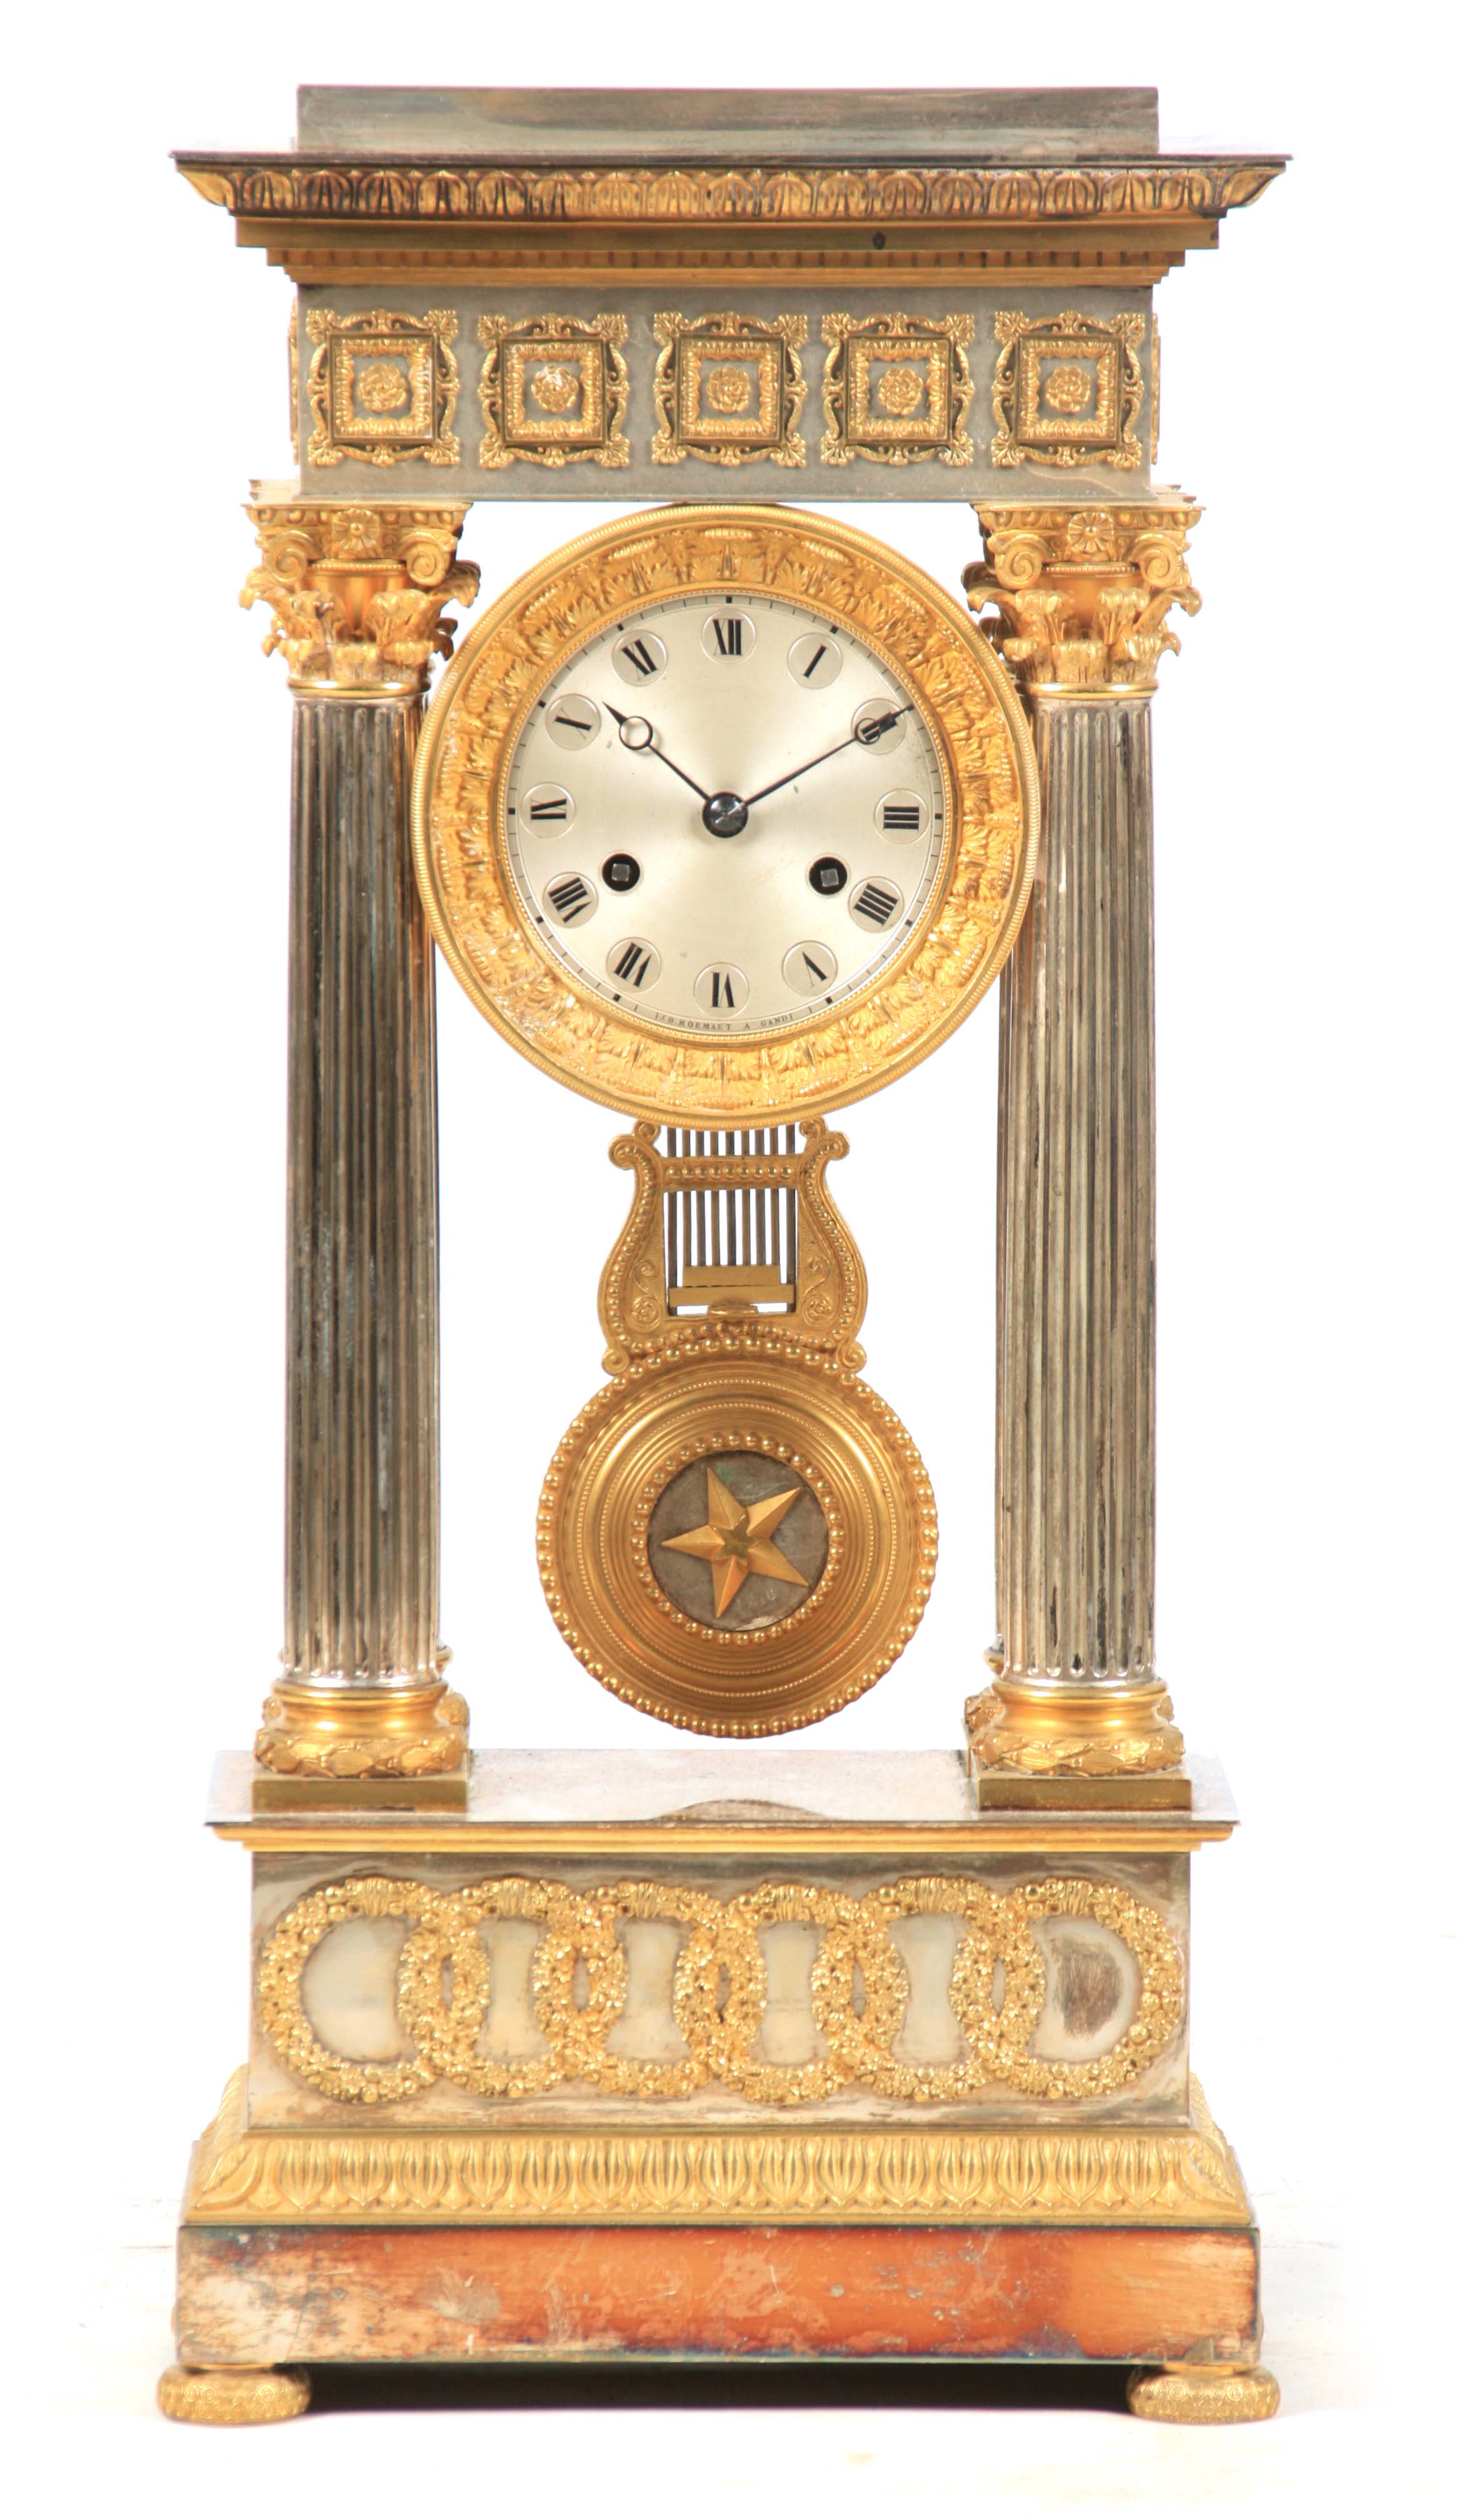 J.B. ROEMAET, A GRAND. A MID 19TH CENTURY FRENCH ORMOLU AND SILVERED PORTICO MANTEL CLOCK the case